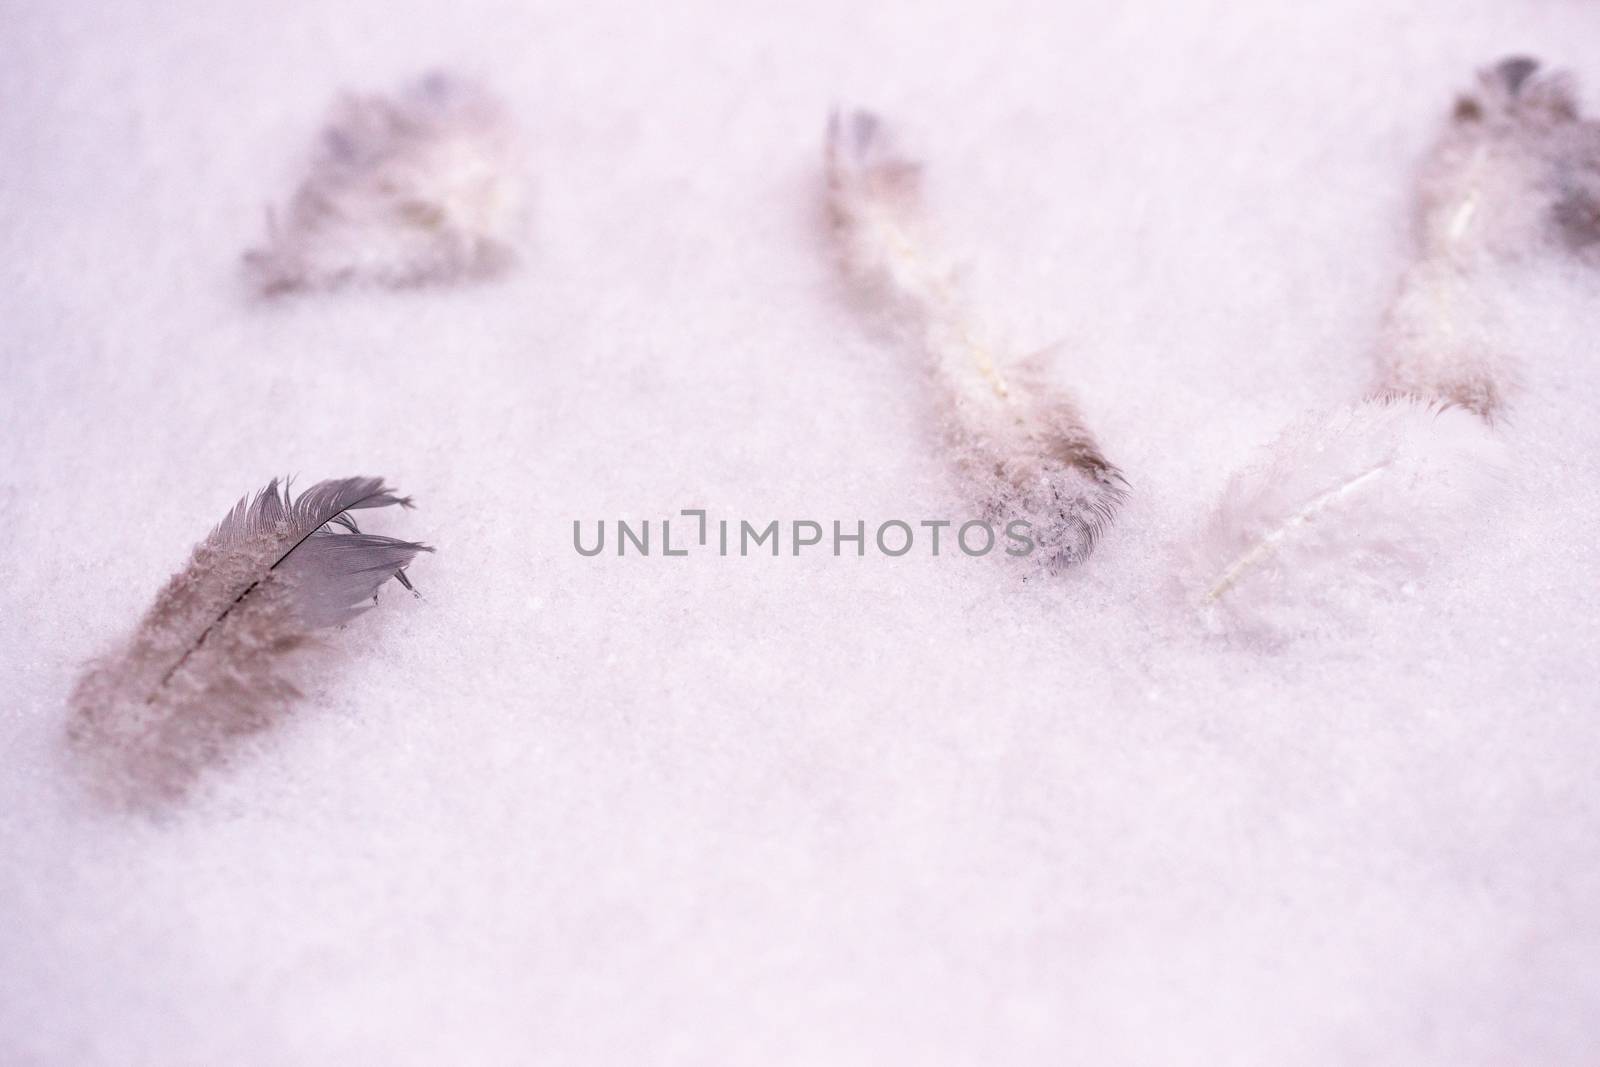 The bird feathers on crystal white dry snow. Dove feathers. Soft focus photo.